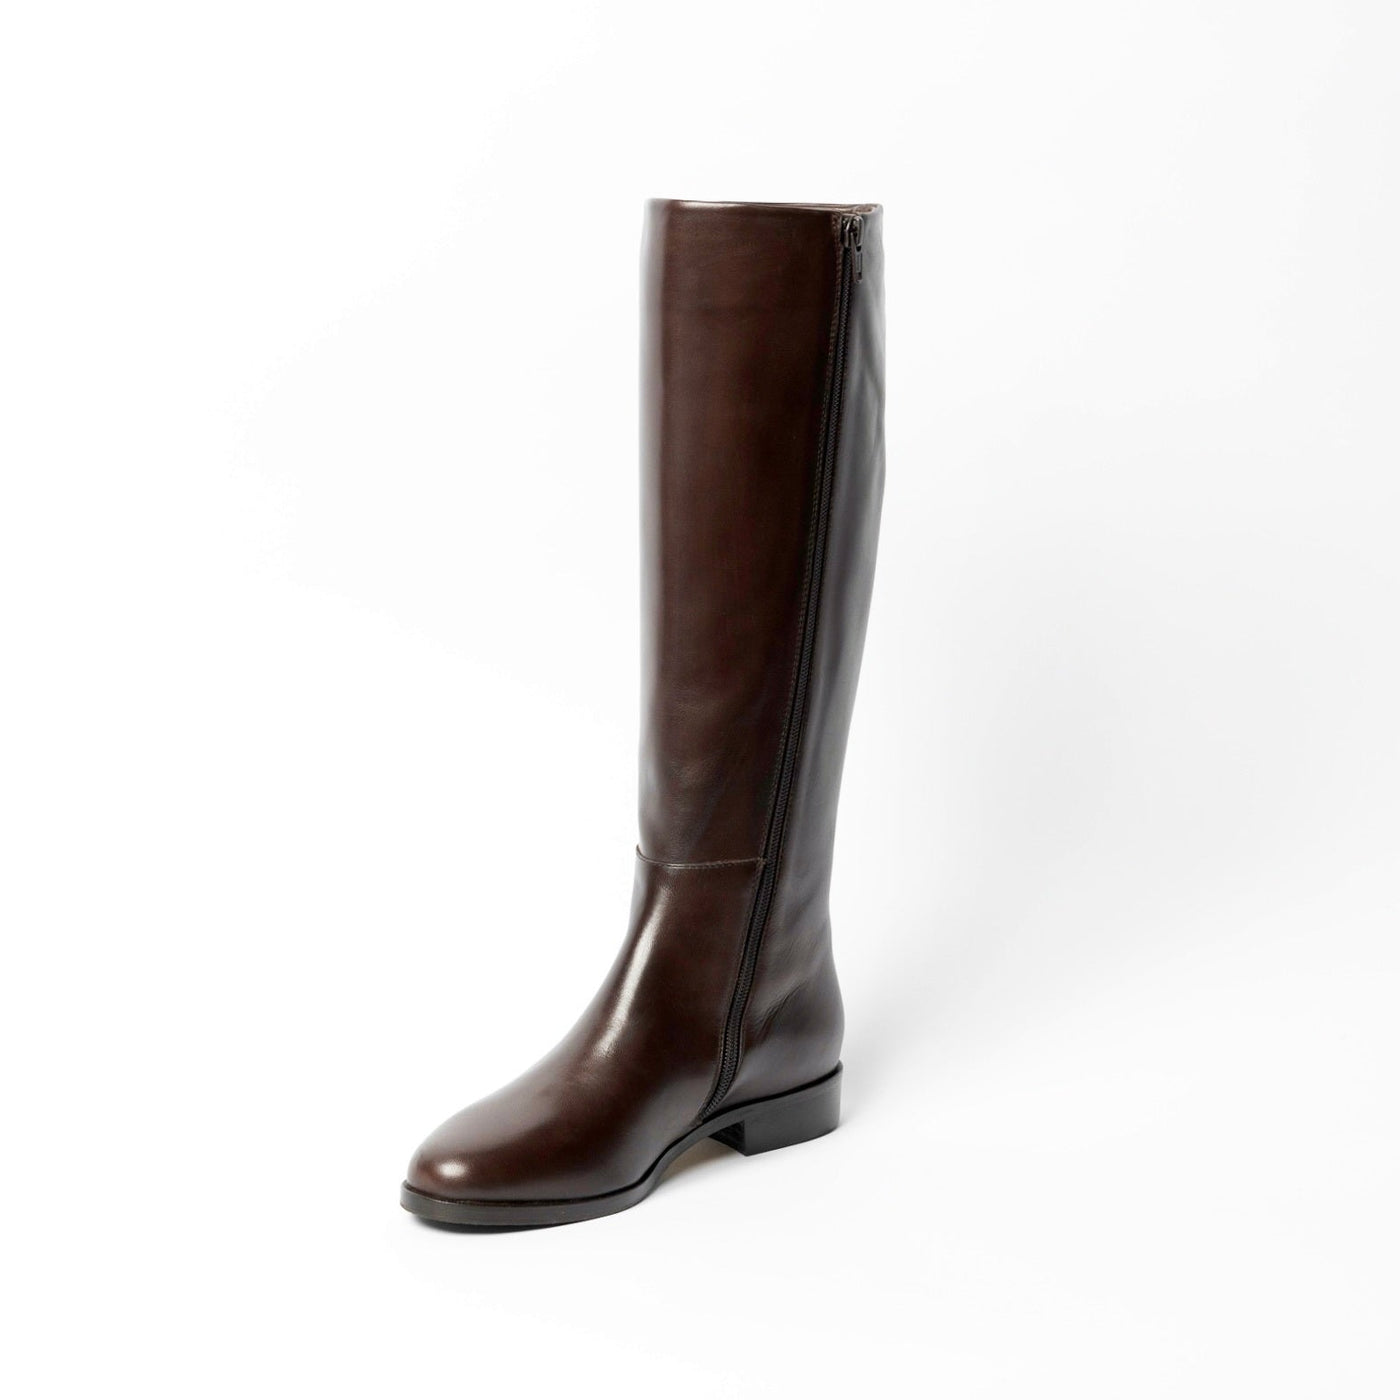 Women's brown leather knee-high boots. 